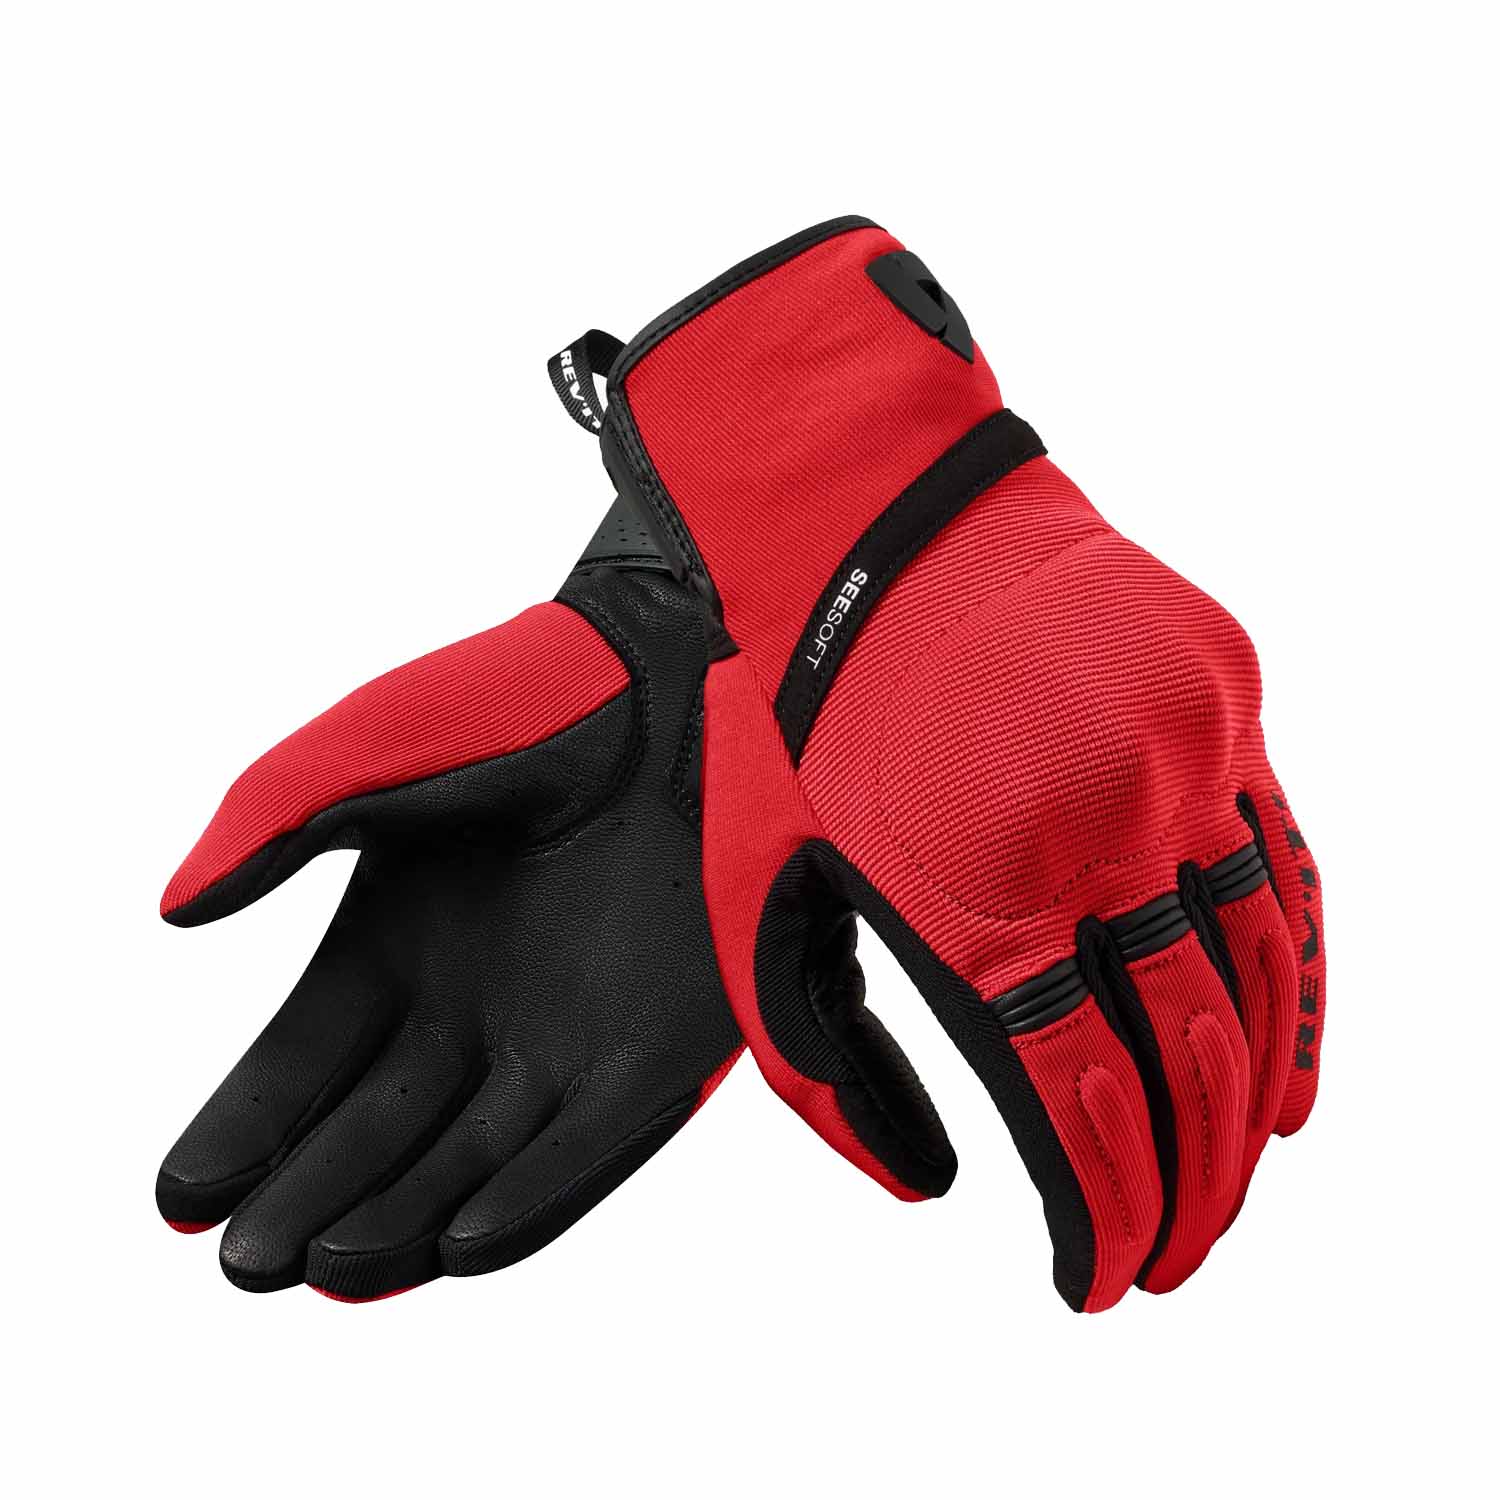 Image of EU REV'IT! Mosca 2 Gloves Red Black Taille XL